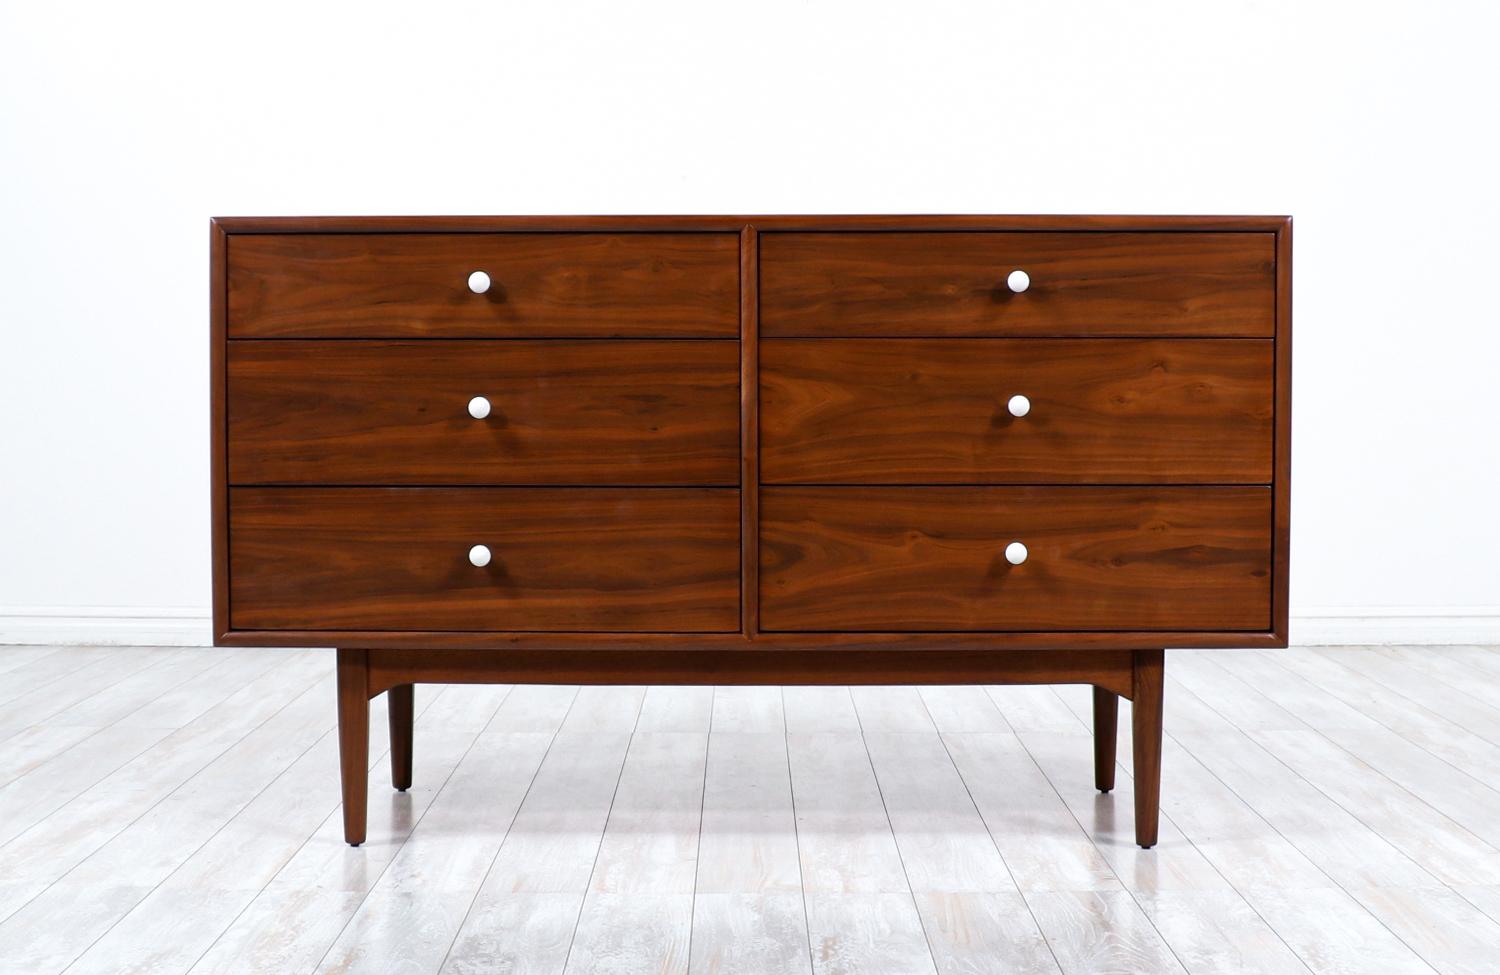 Splendid dresser designed by Kipp Stewart & Stewart MacDougall for Drexel’s Declaration line in the United States circa 1950’s. This beautiful dresser has been recently refinished by our expert team keeping its original pieces. It features six